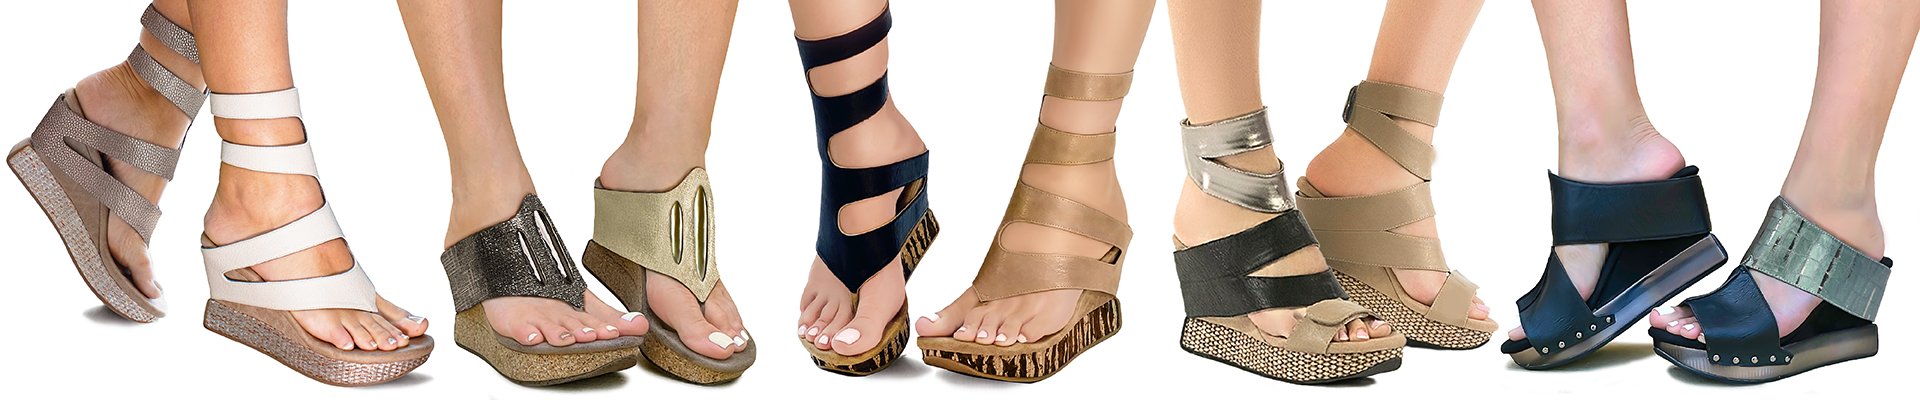 A collection of women's high wedges in various colors